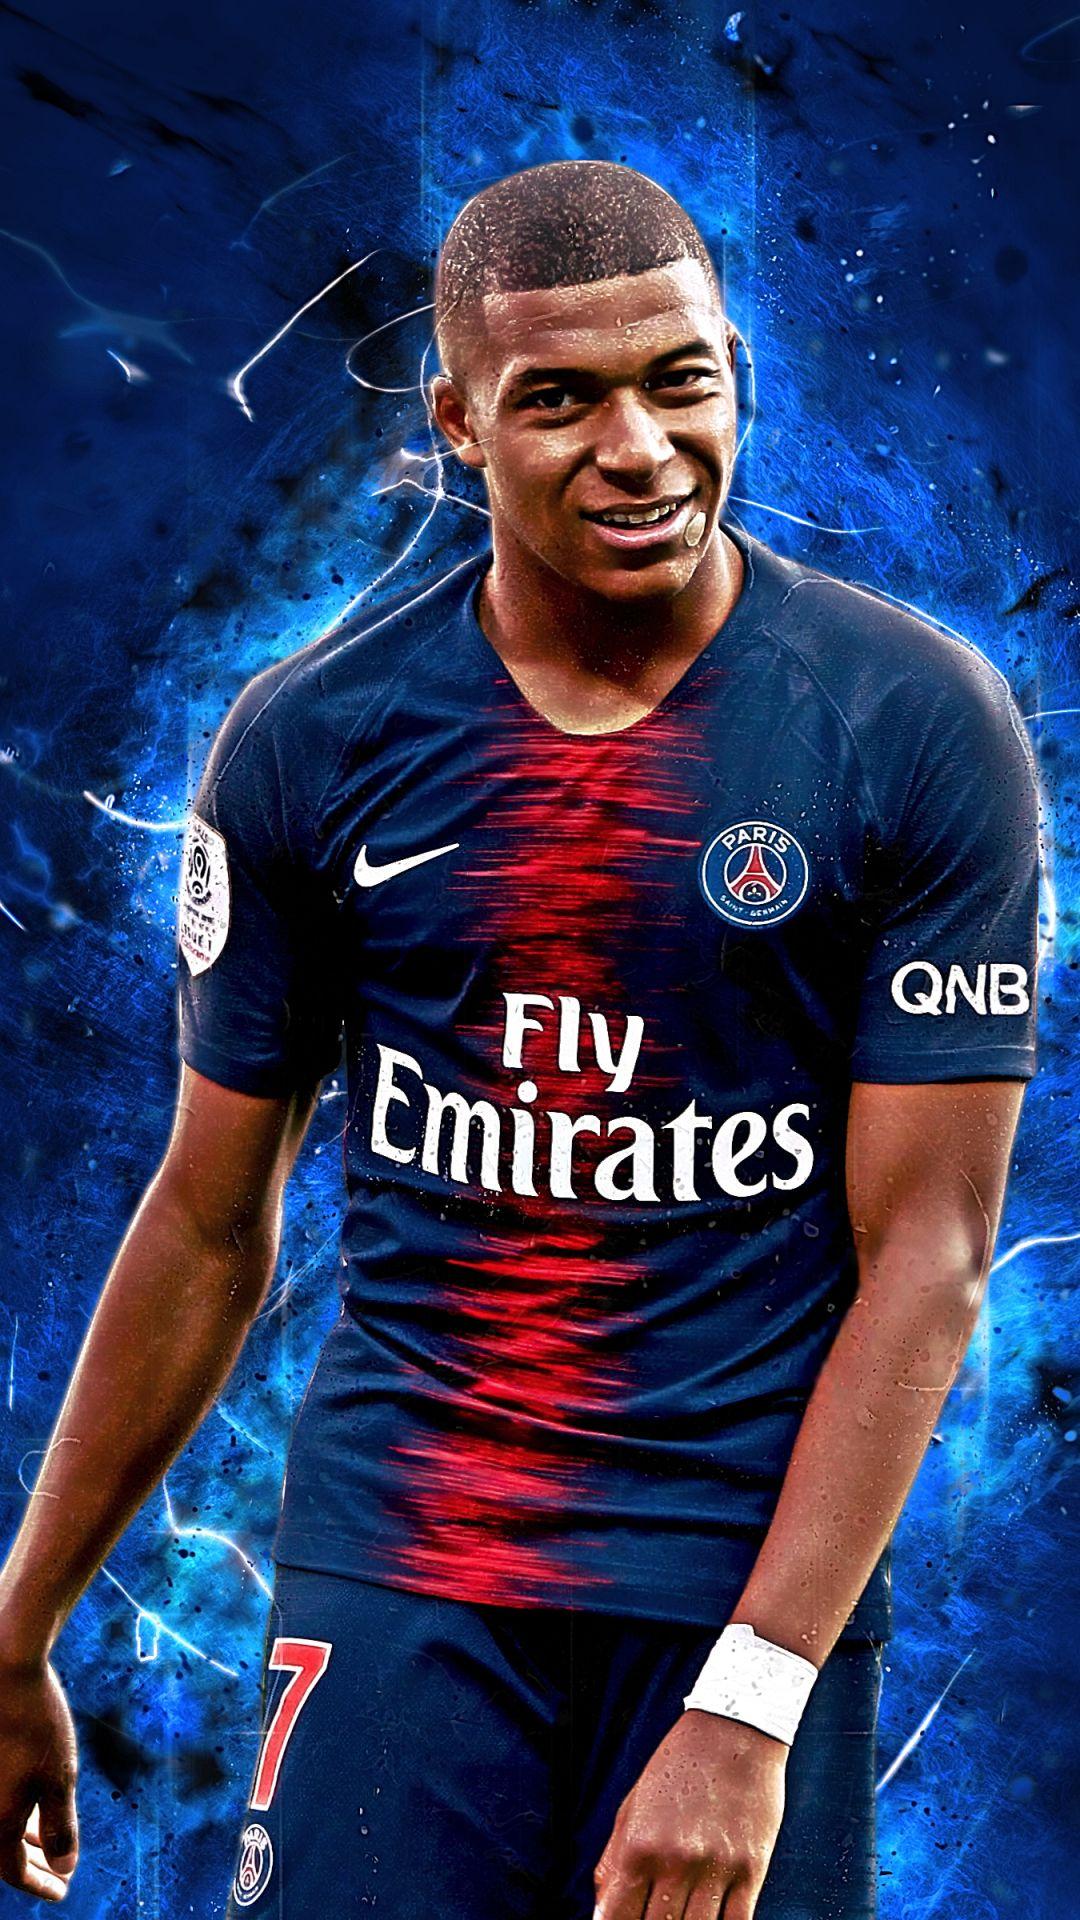 Mbappe Wallpapers - Top Free Mbappe Backgrounds ...